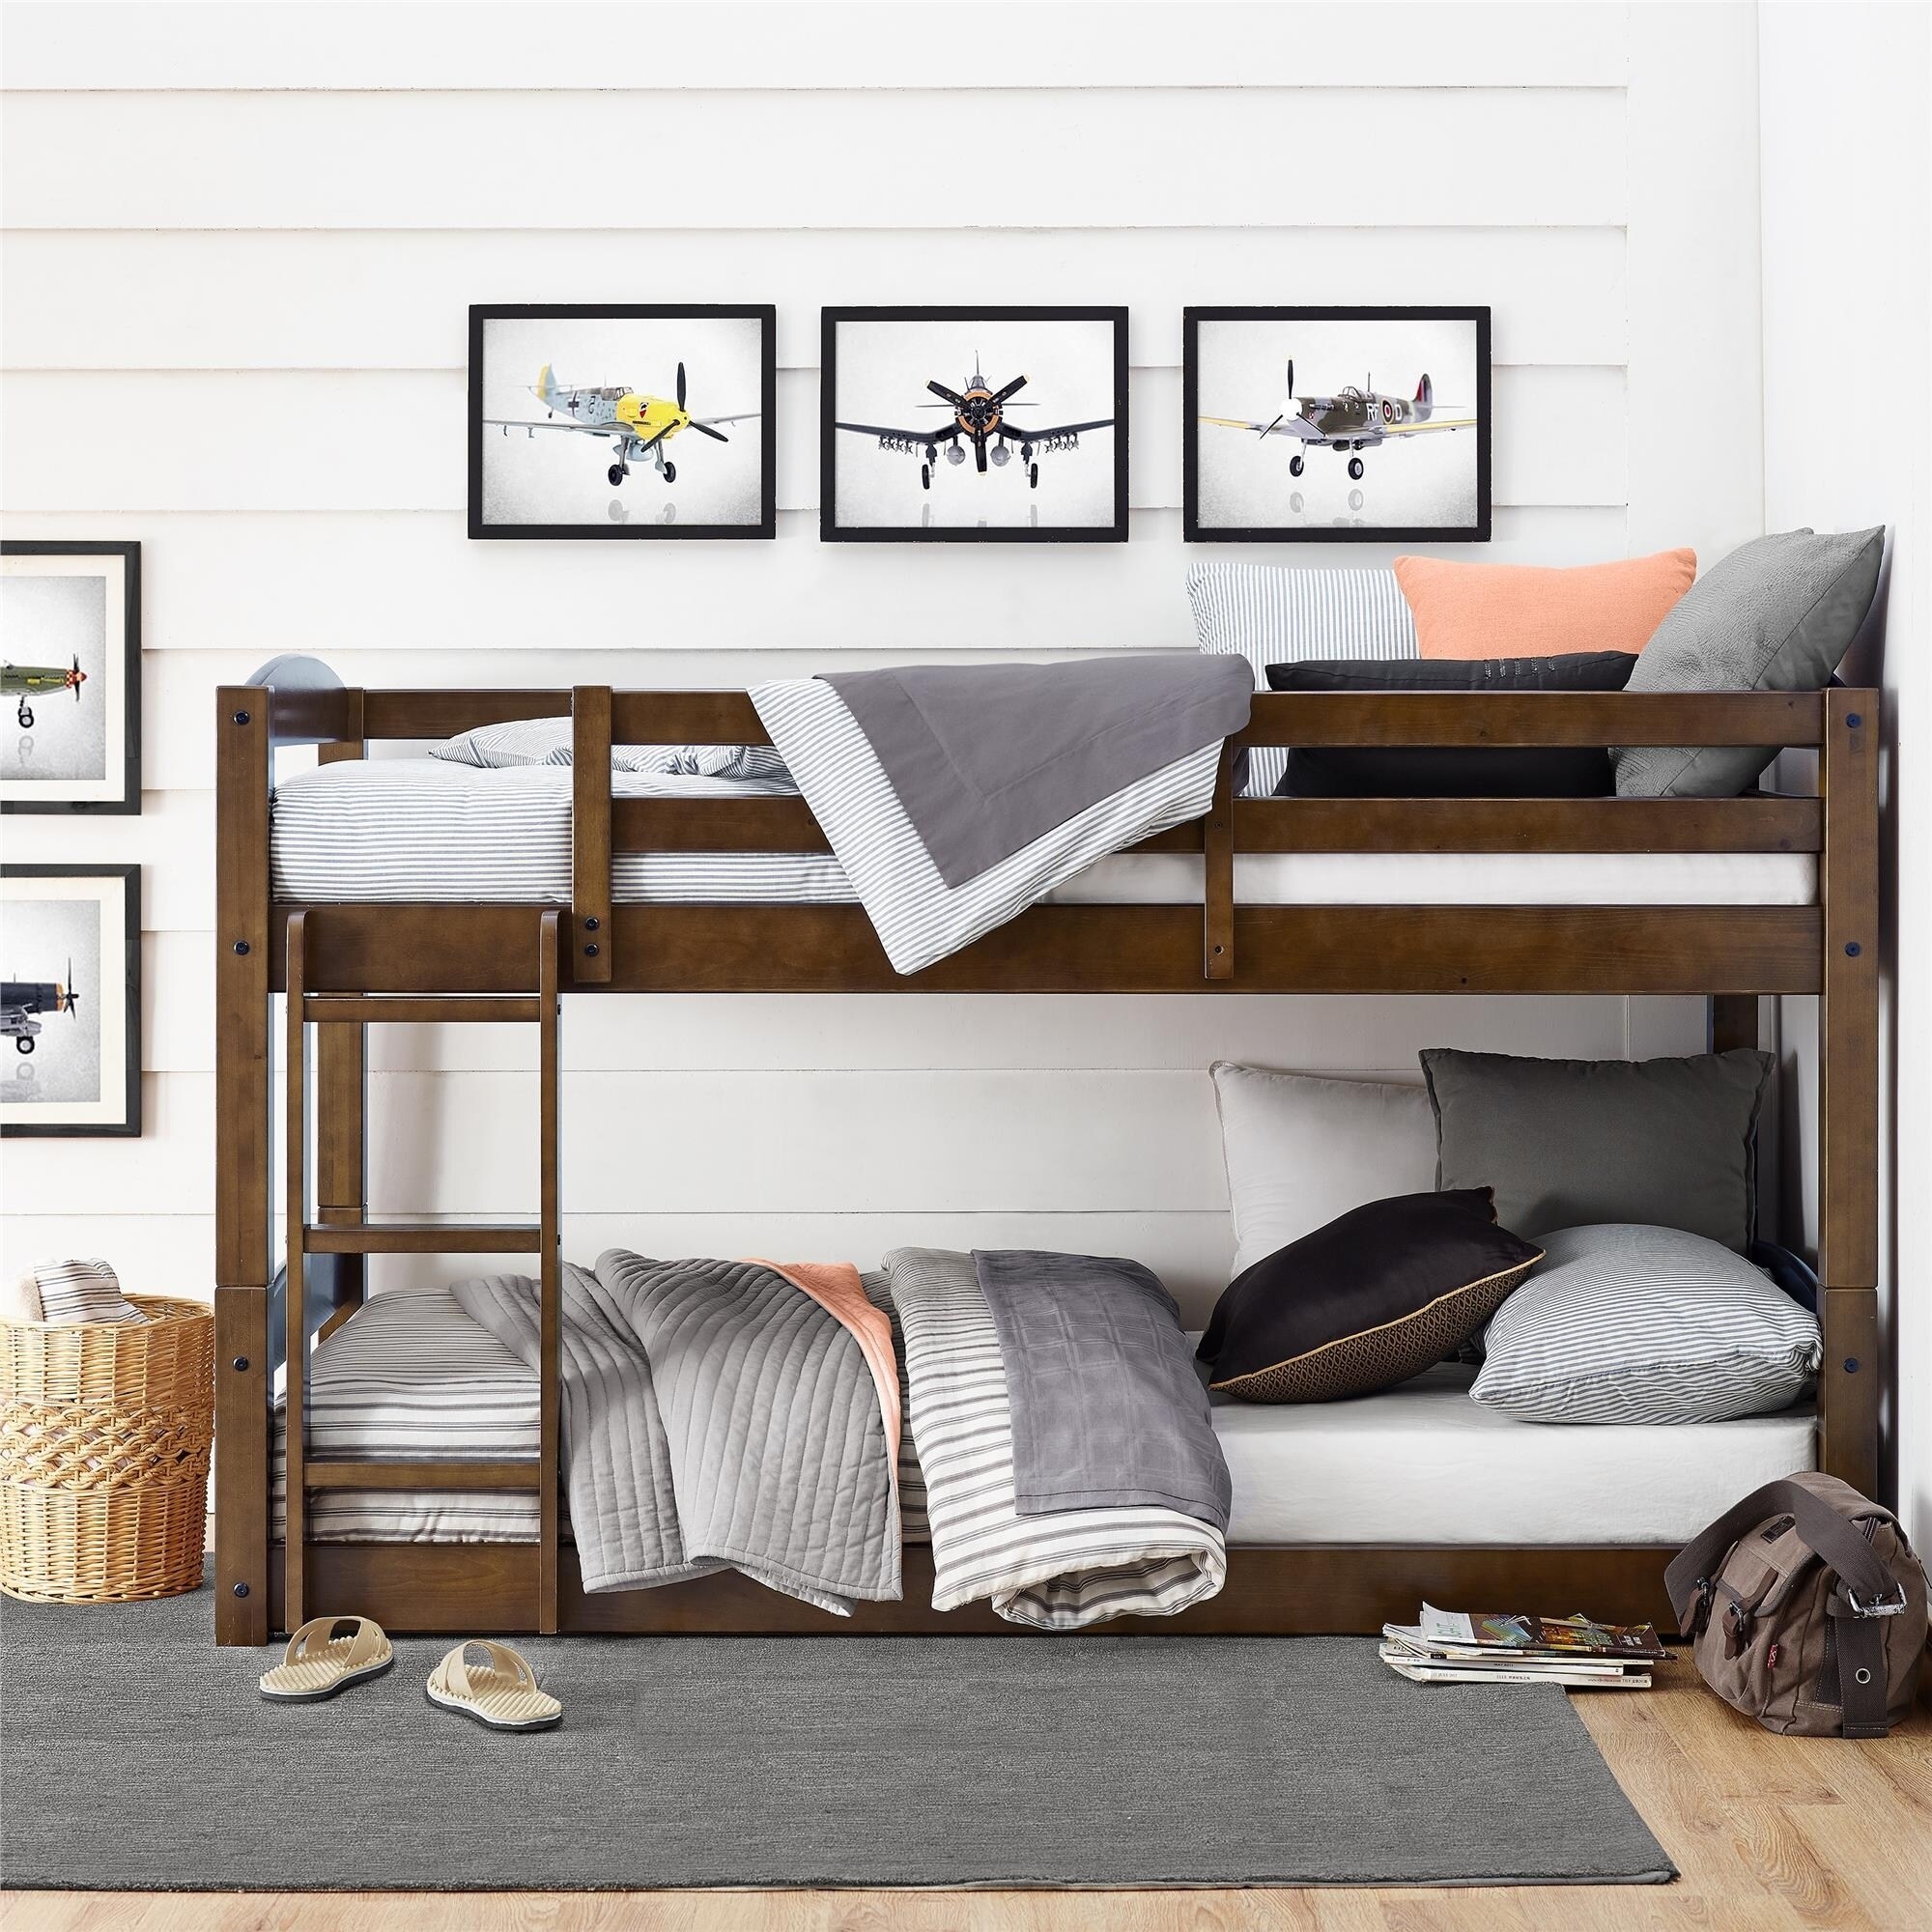 alluvial twin bunk bed